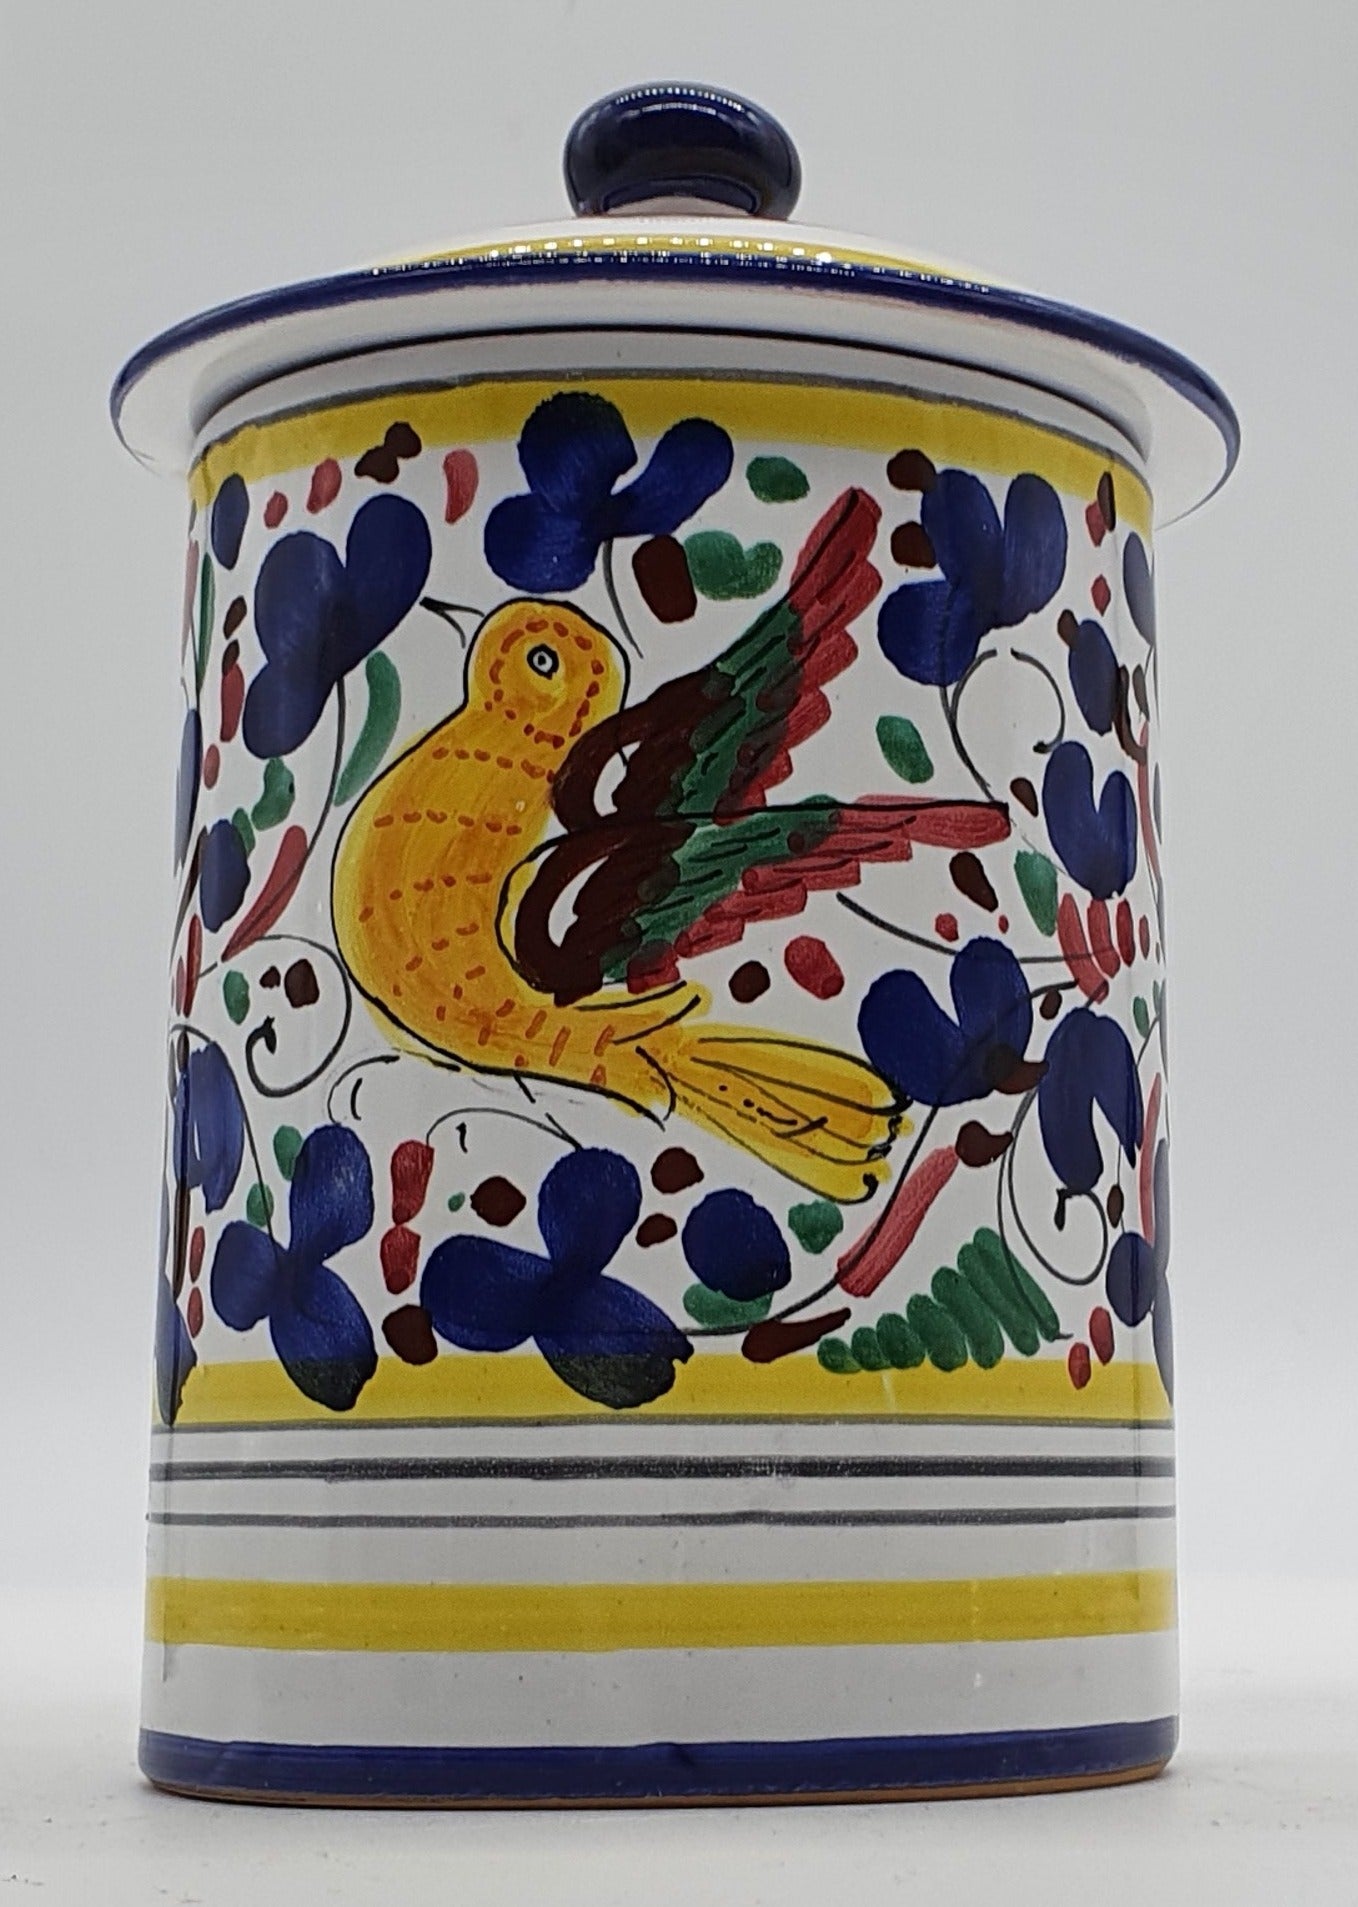 Jar with colored Arabesque decoration